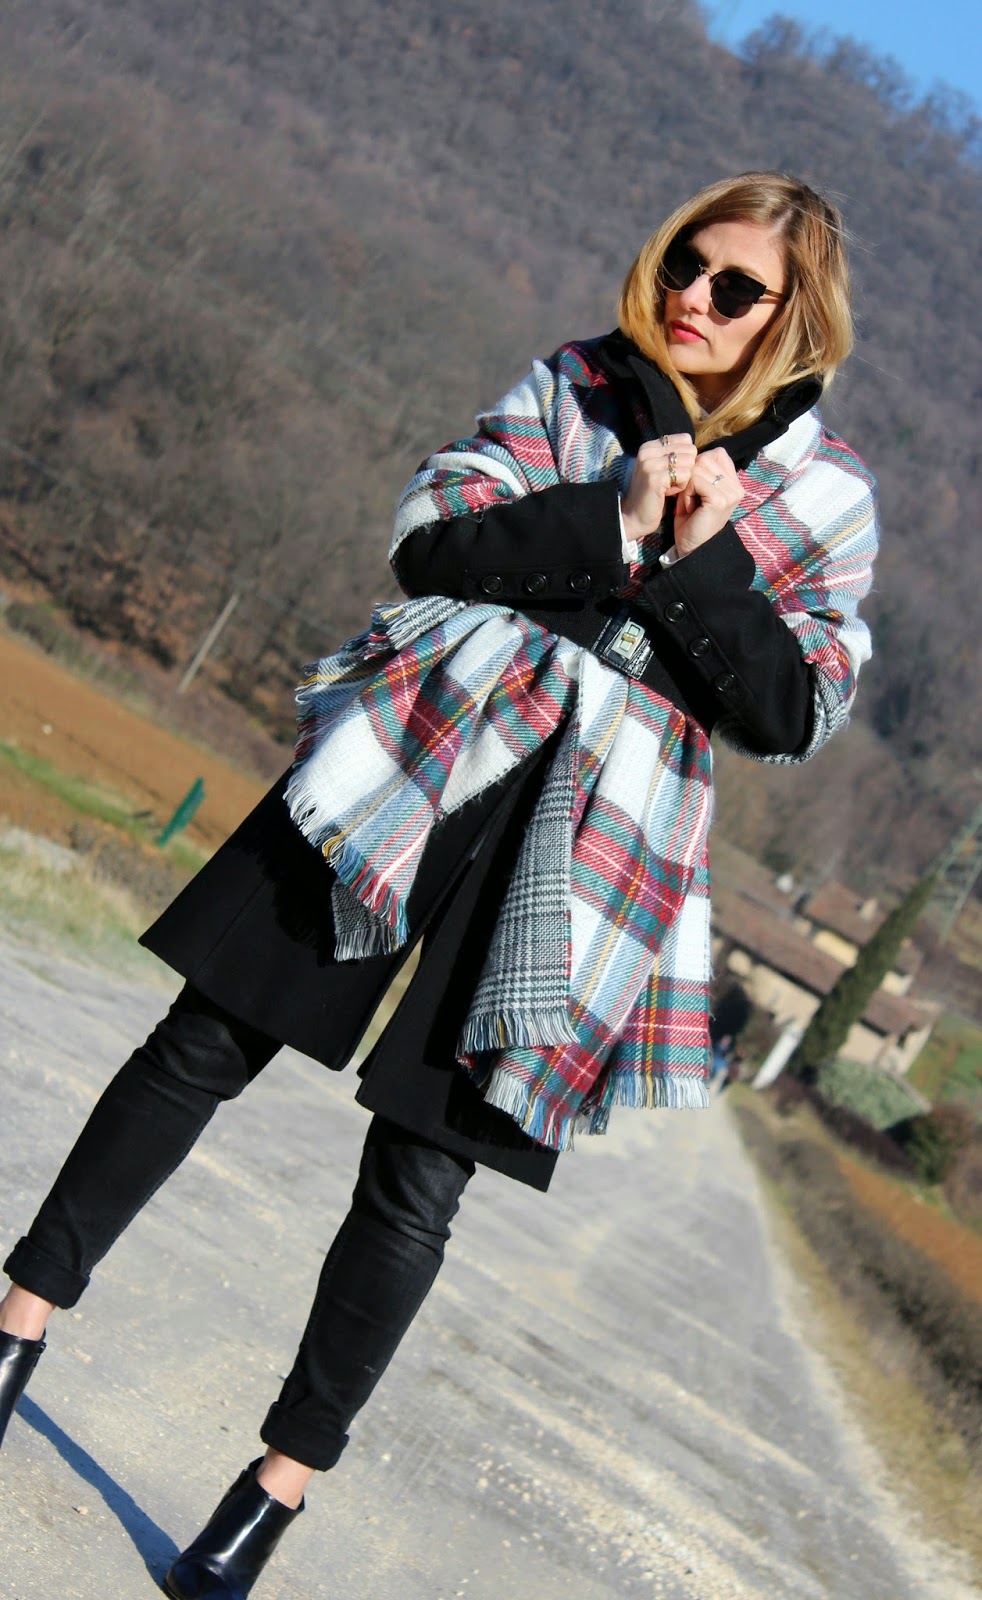 Eniwhere Fashion - Totally casual black outfit and maxi scarf